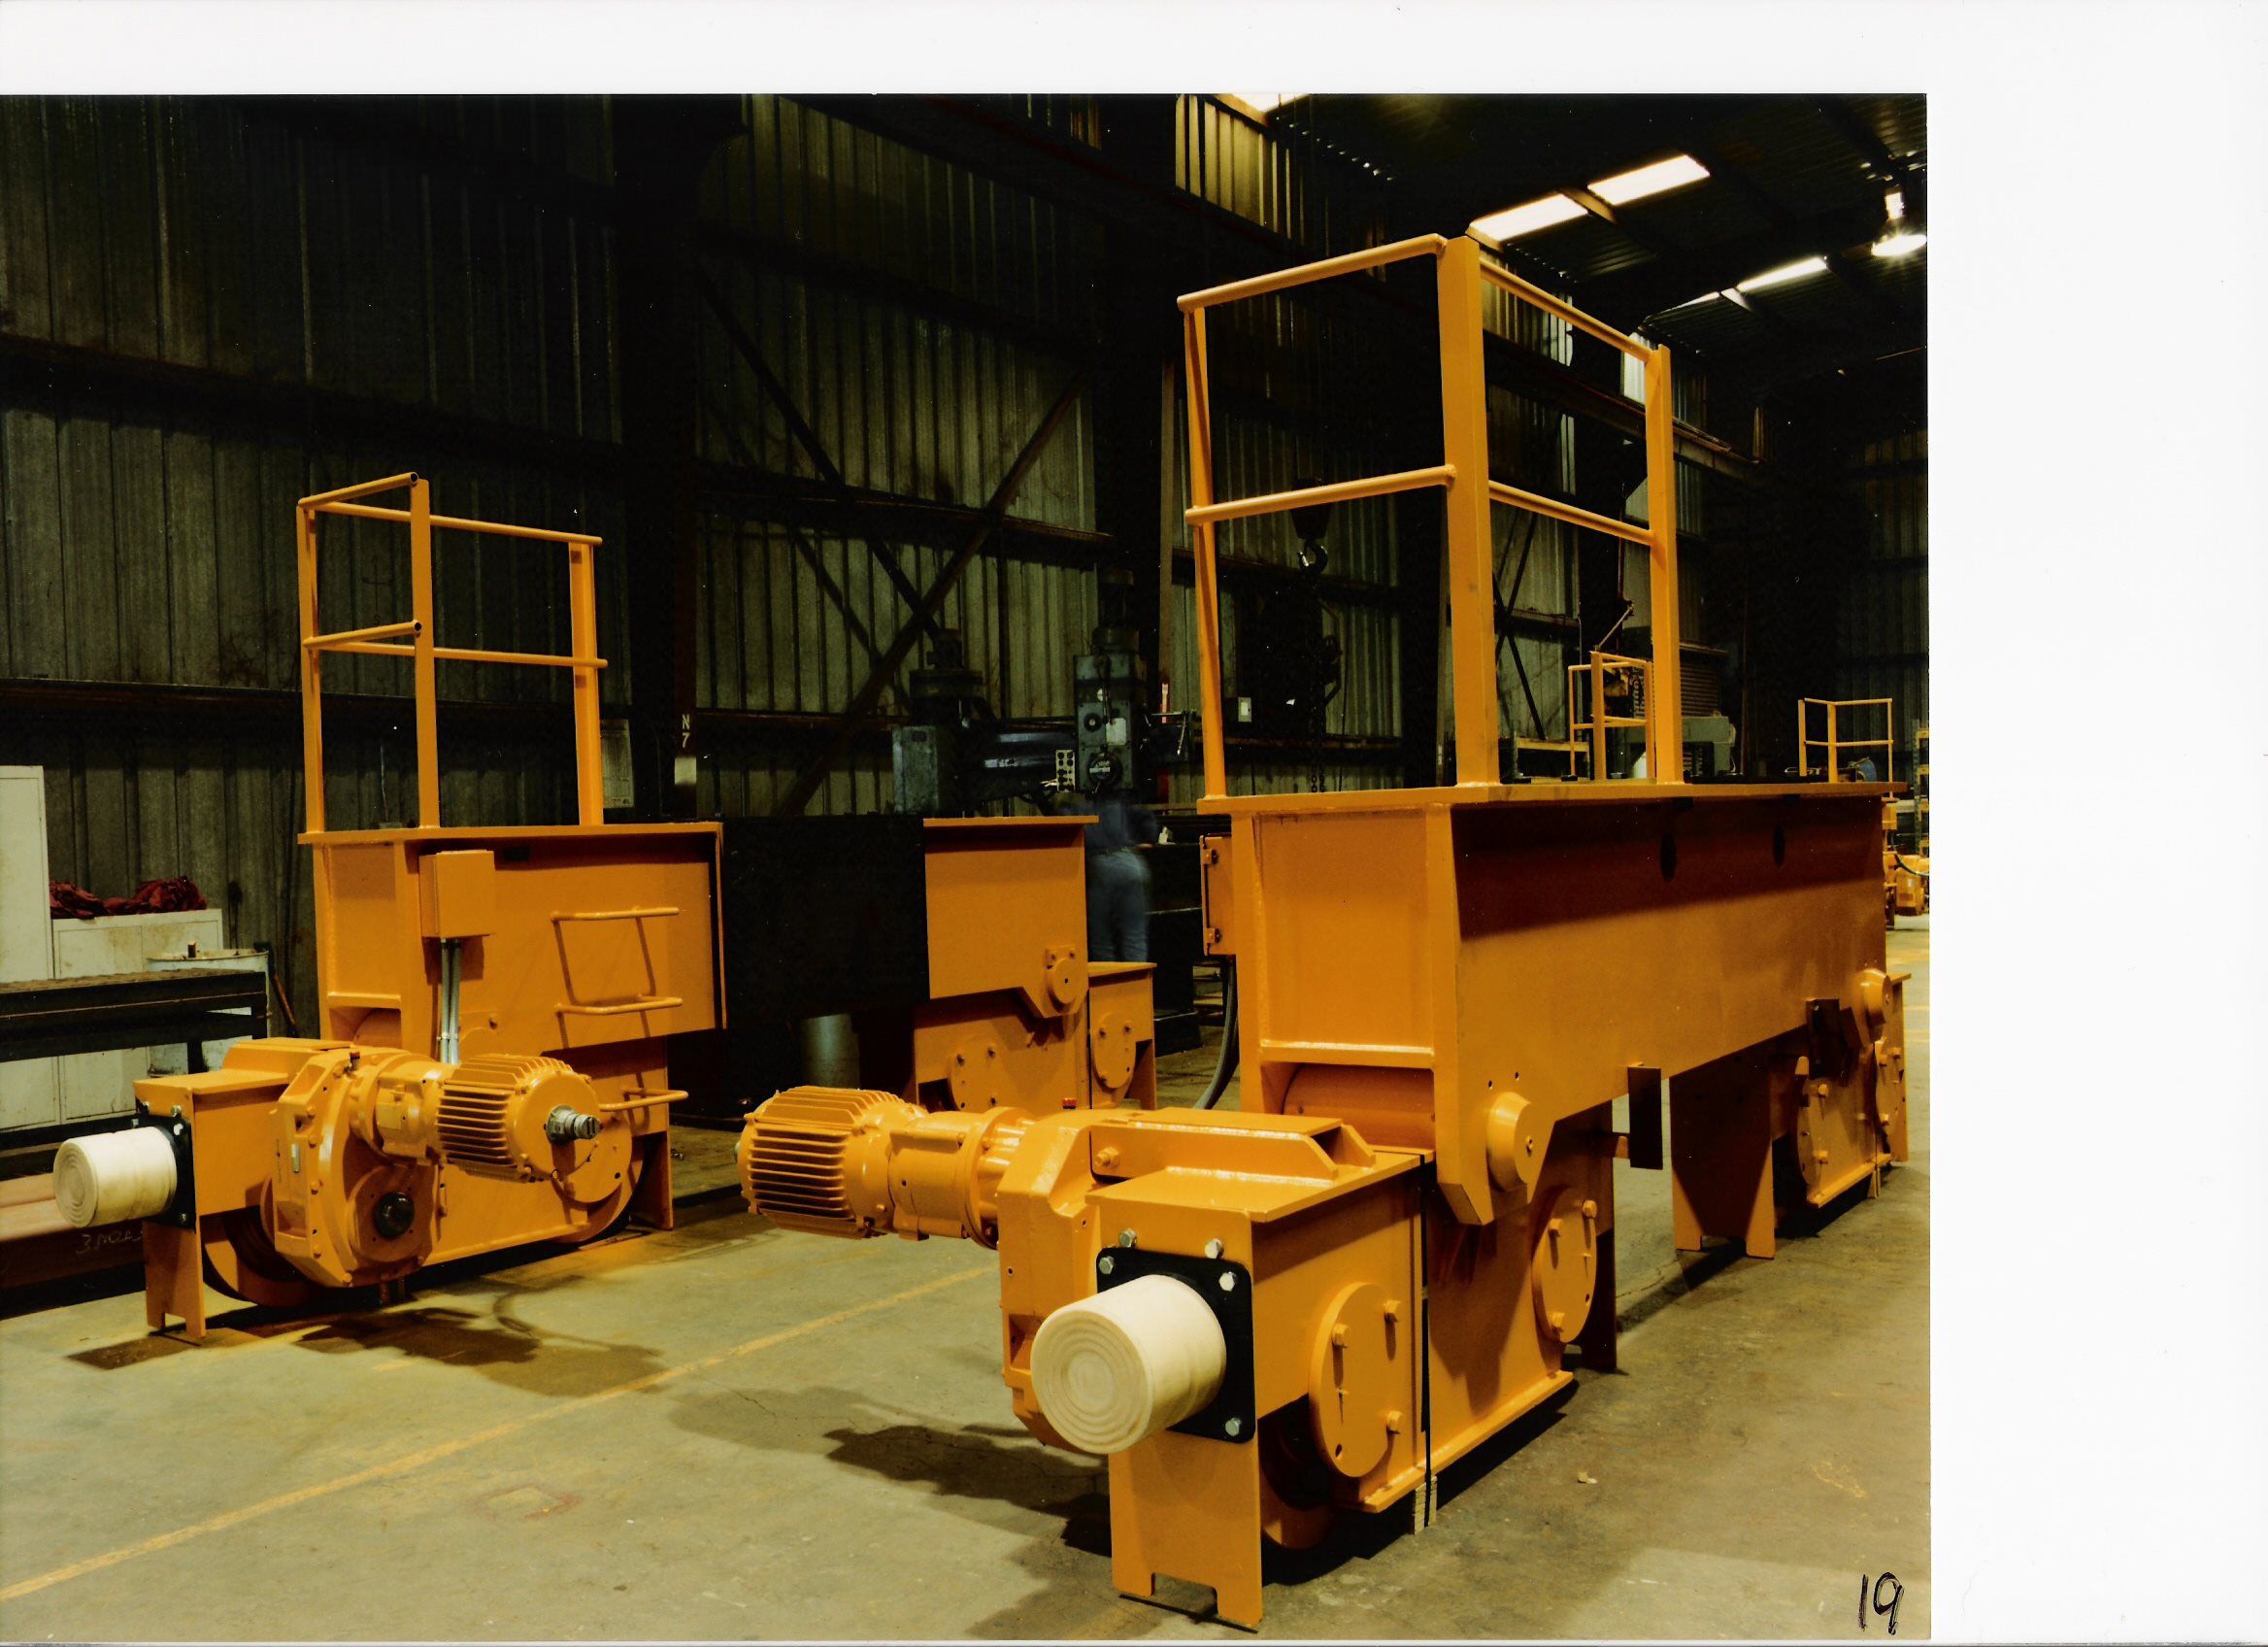 Bogie end trucks with handrails